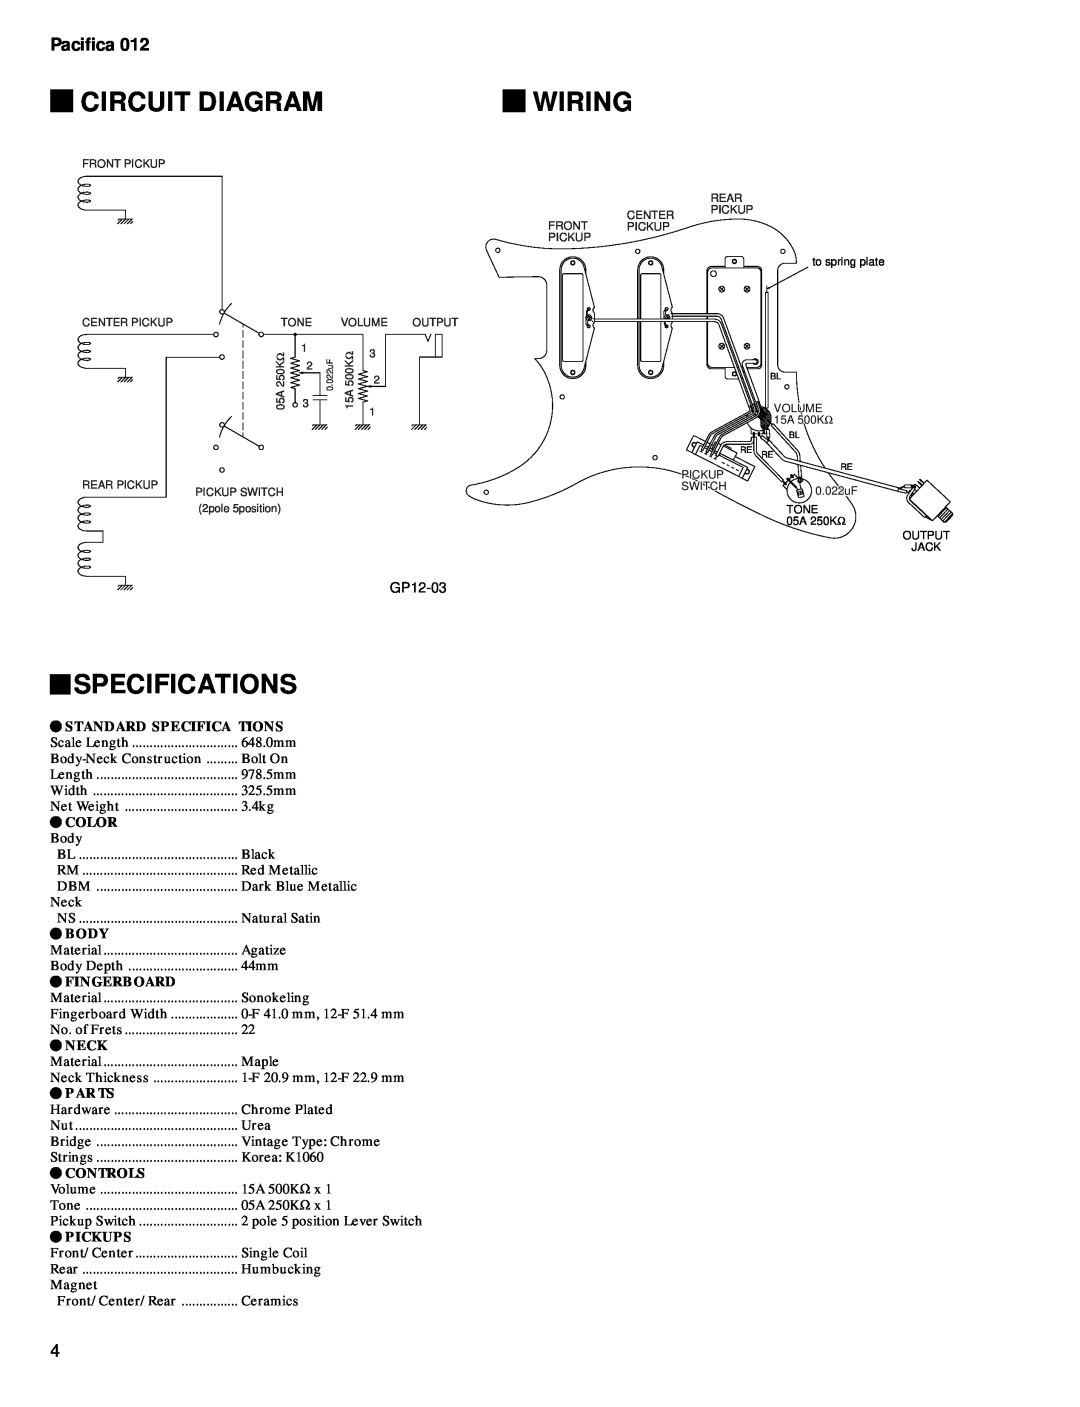 Yamaha Electric Guitar Circuit Diagram, Wiring, Specifications, Pacifica, Standard Specifica Tions, Color, Body, Neck 